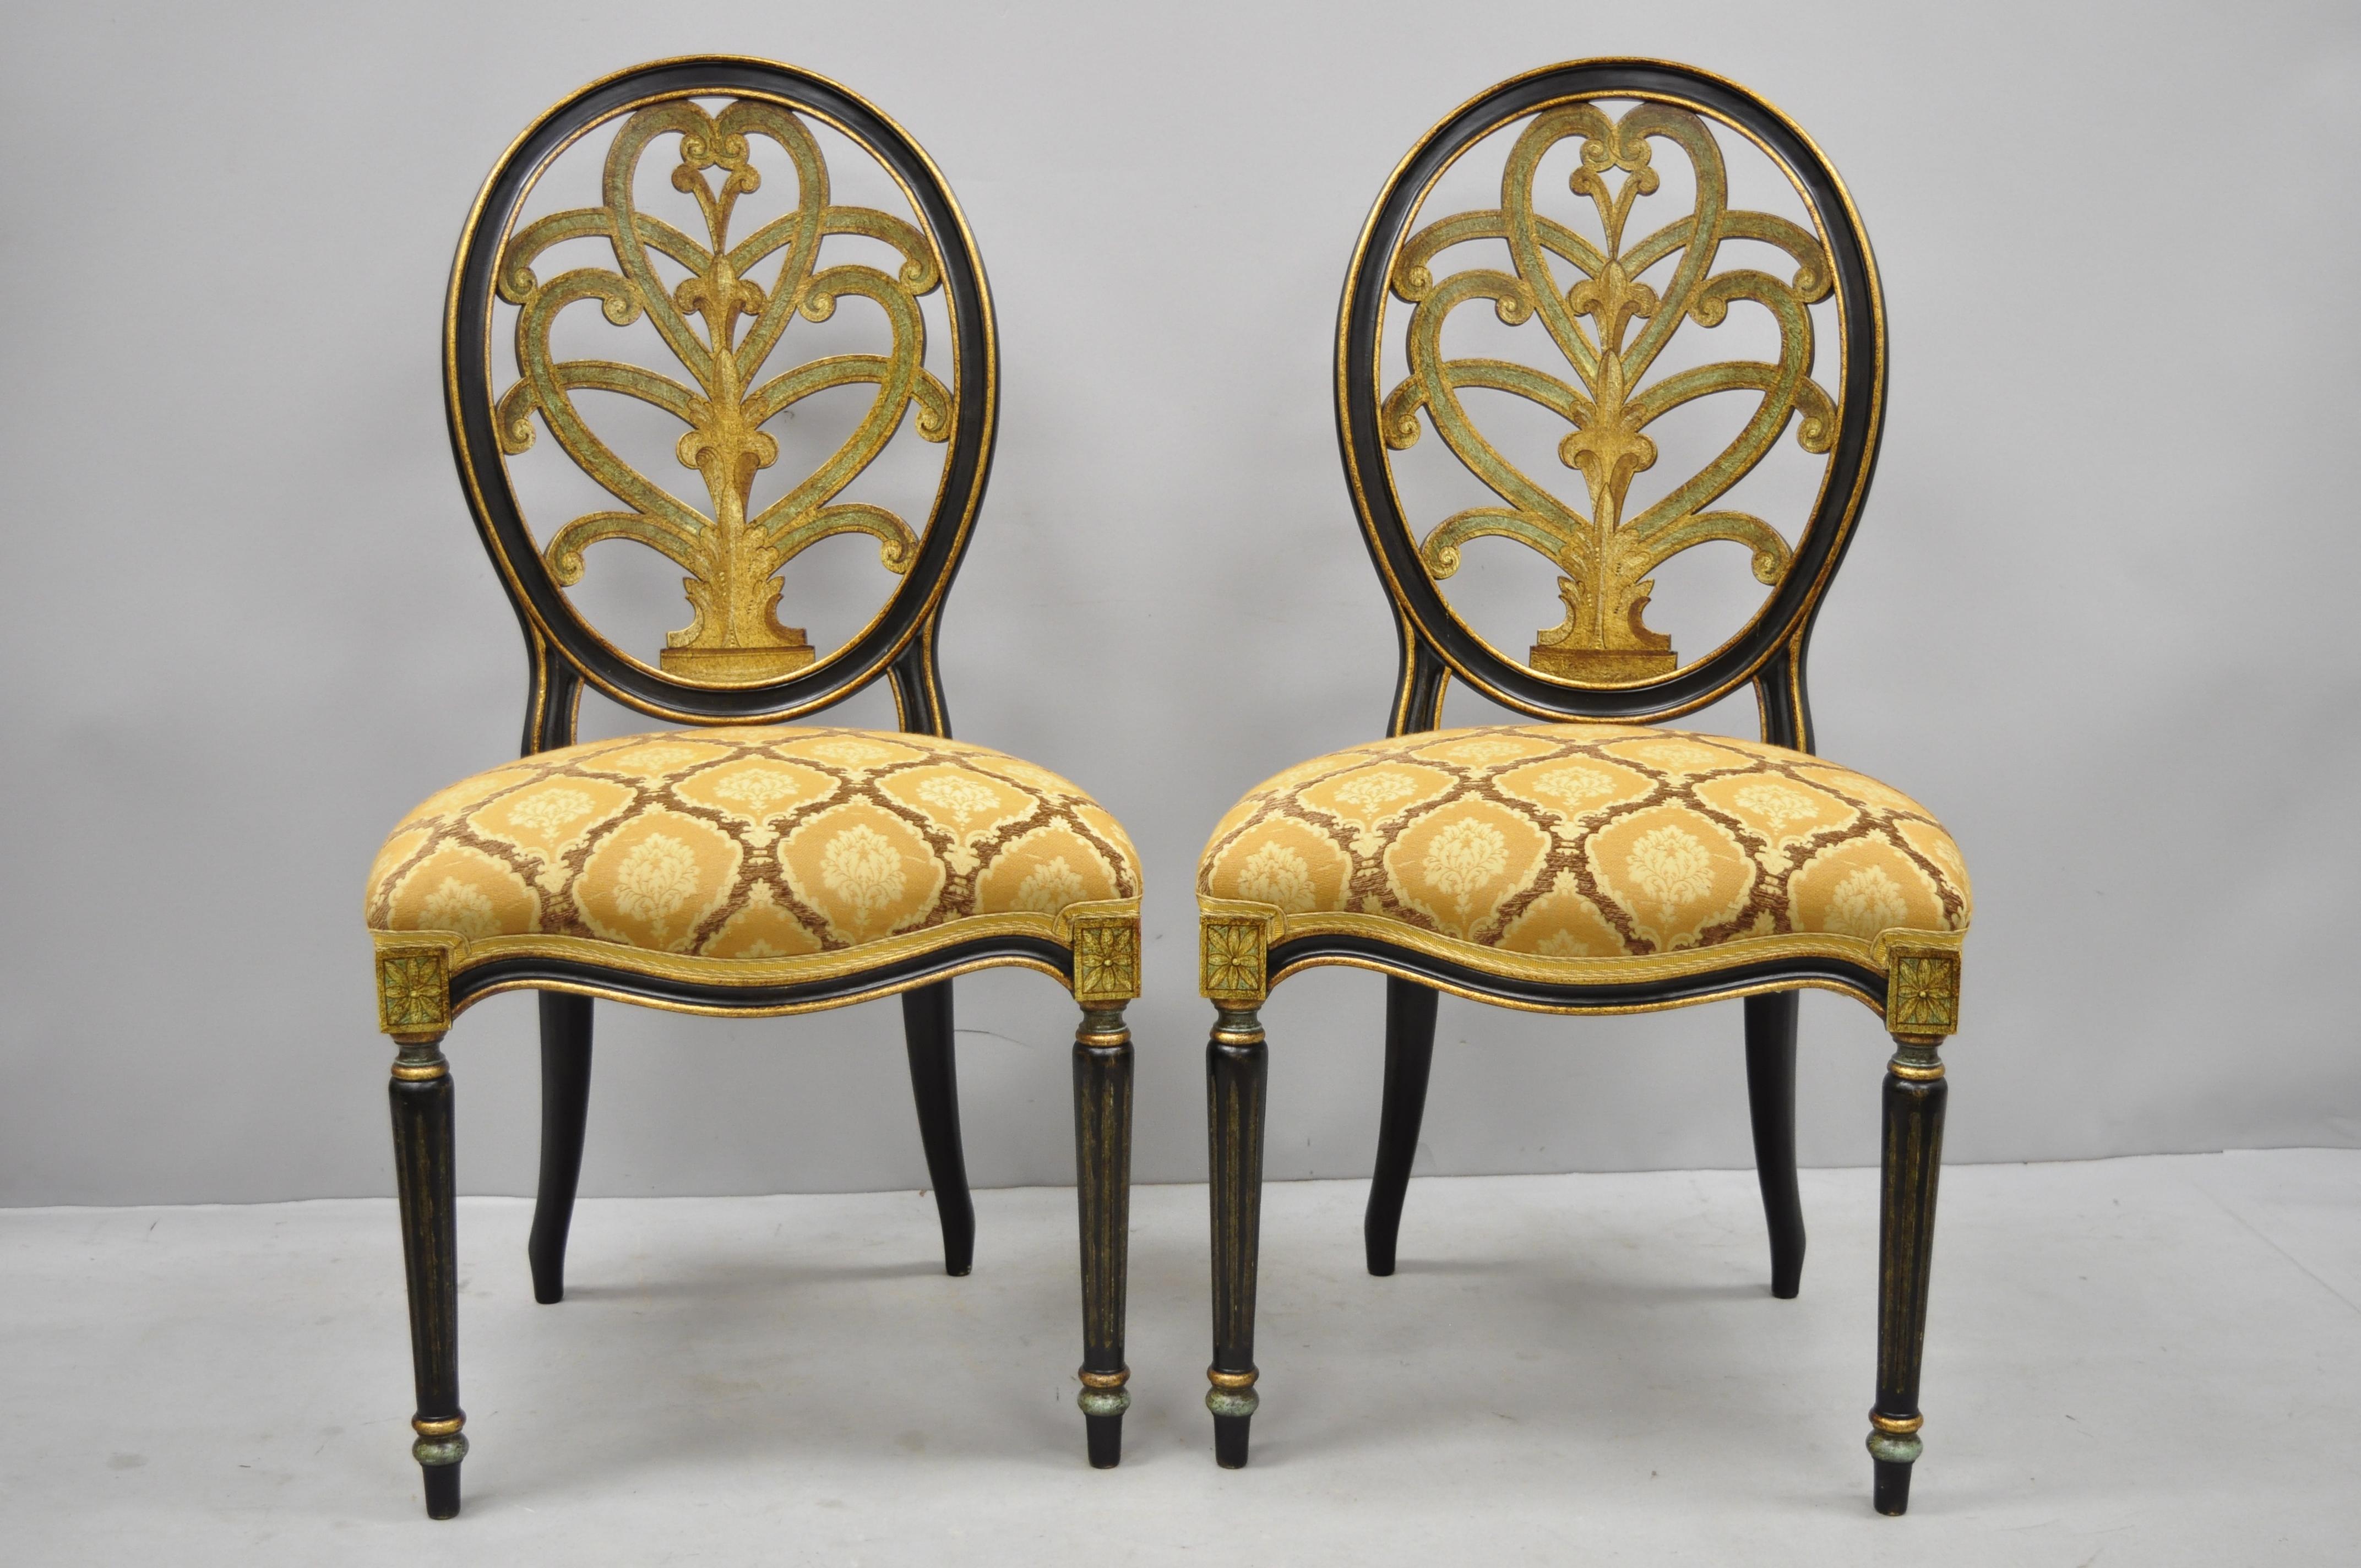 Pair of Galimberti Lino Italian Regency Hepplewhite Adams style pointed side chairs. Items feature plume carved scrollwork back, hand painted green gold and black distressed finish, angled and tapered legs, solid wood construction, original label,